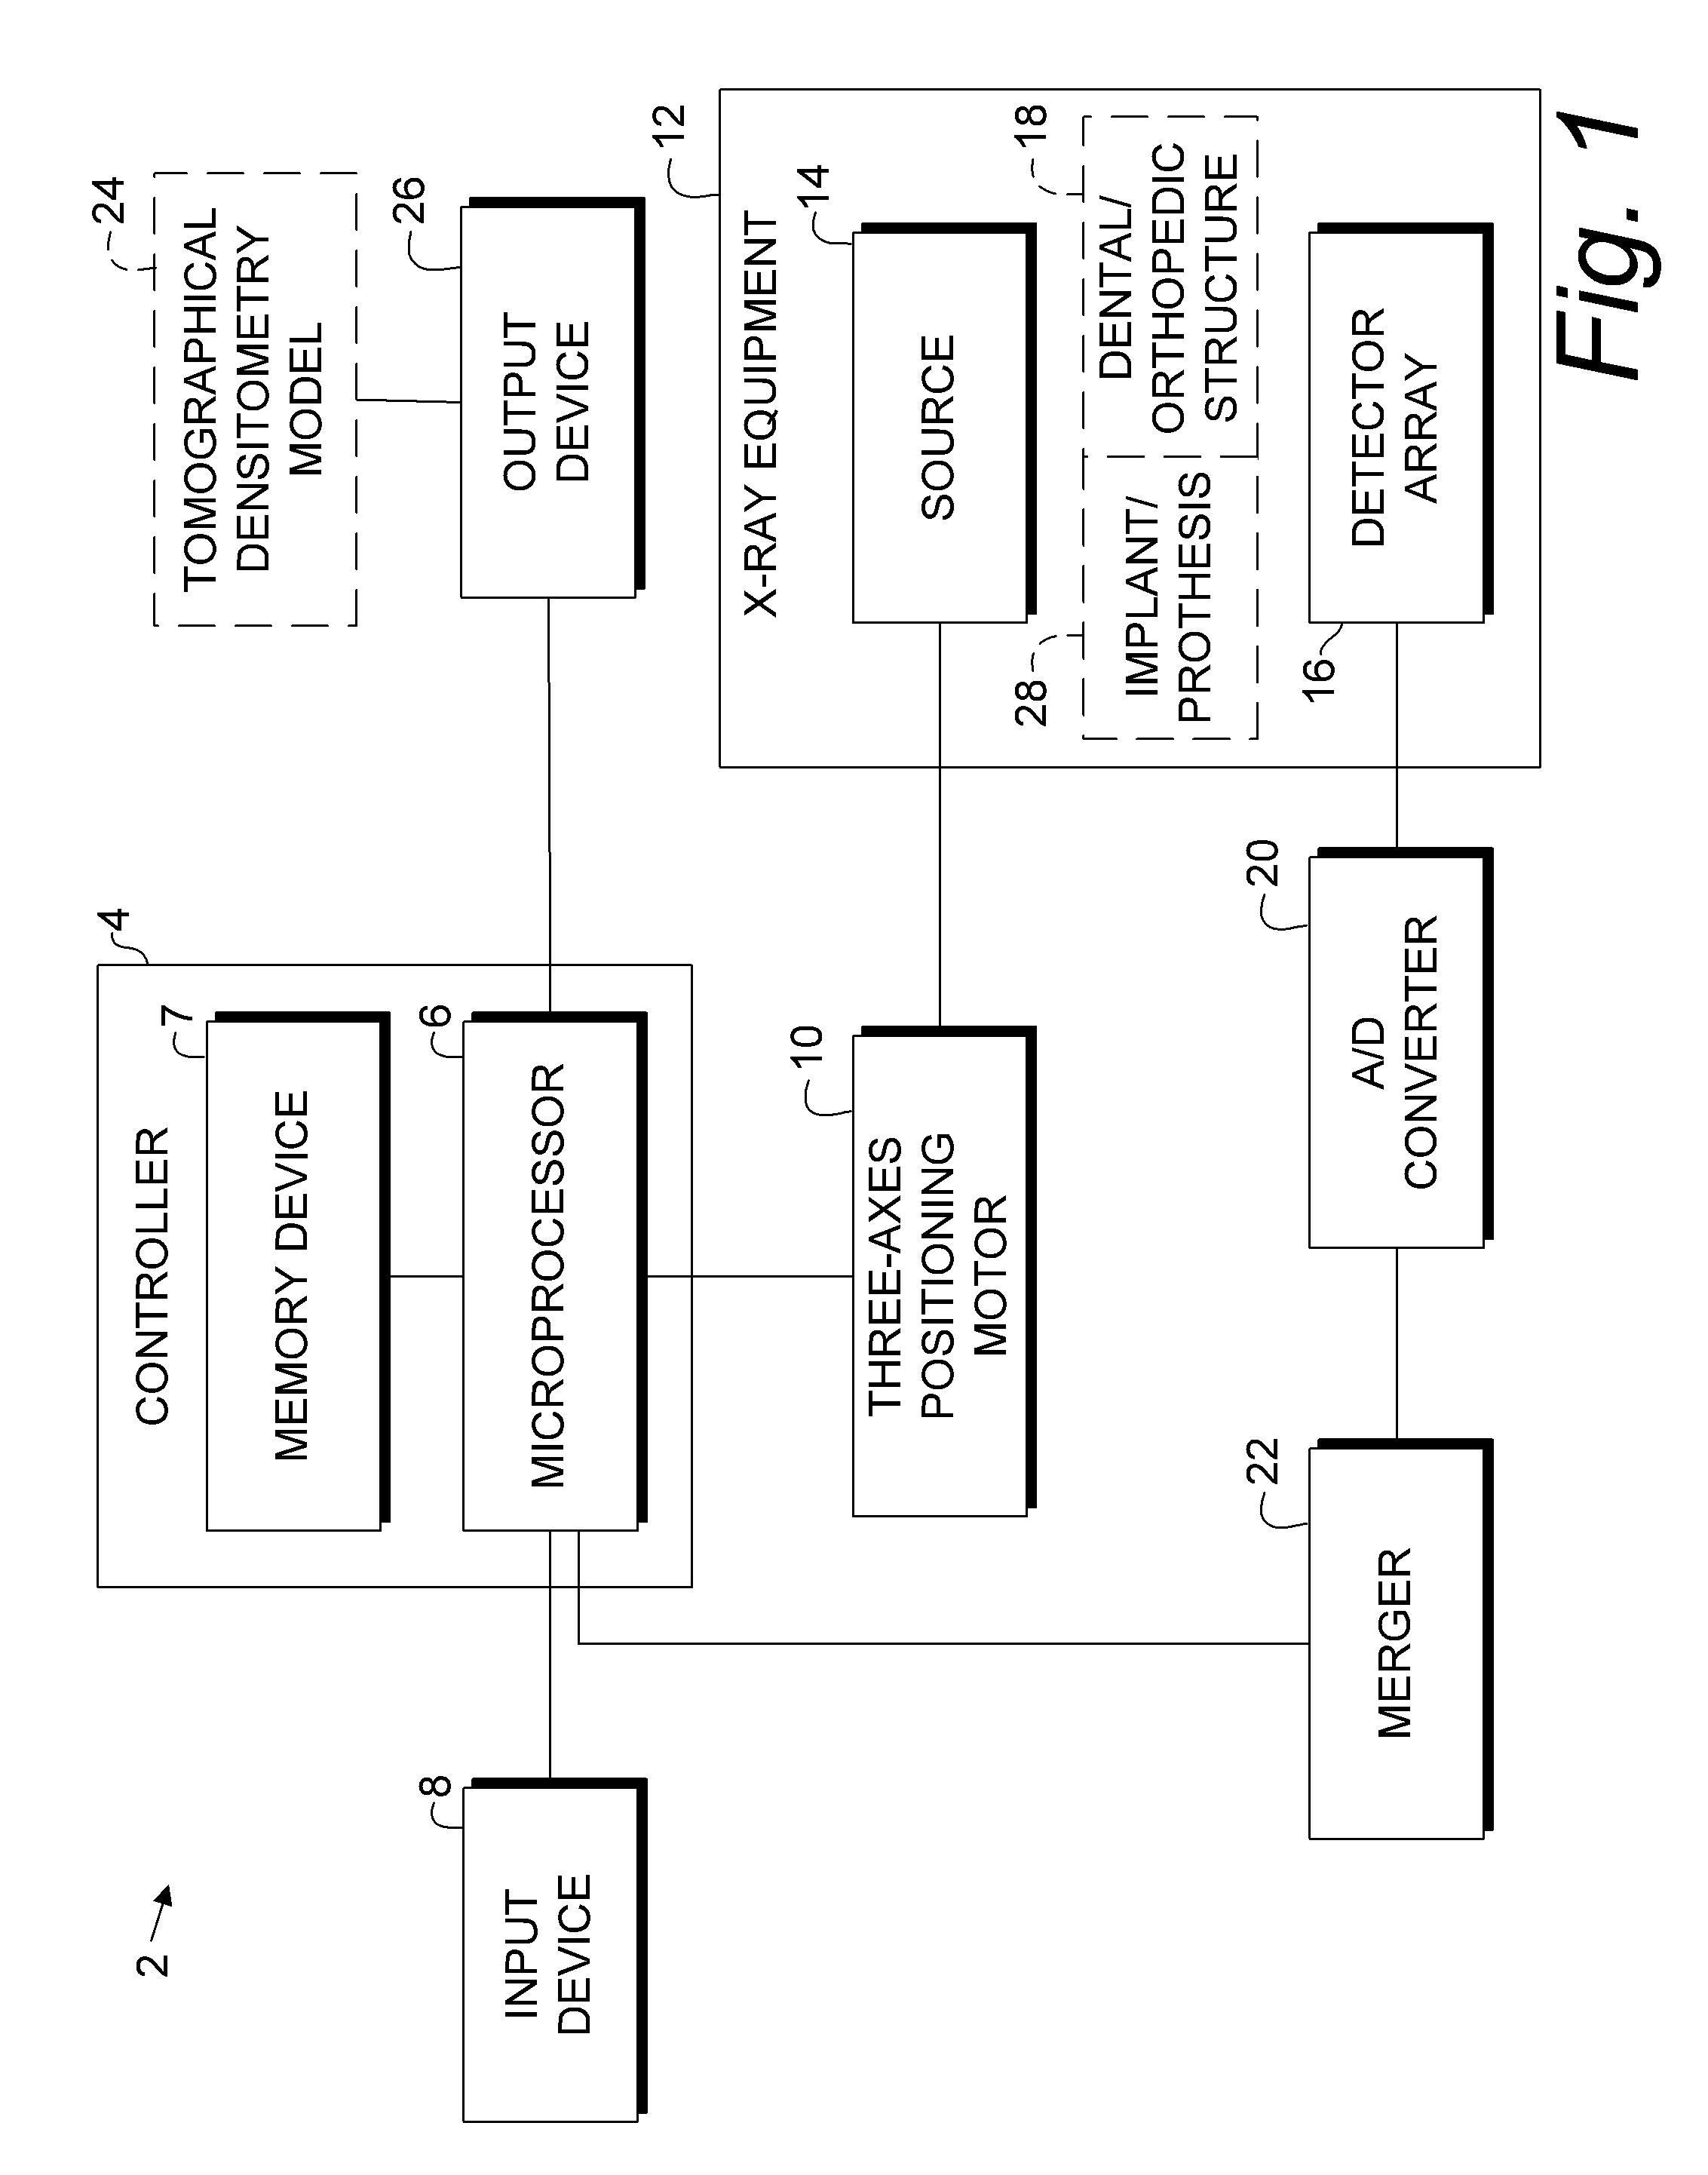 Osseo classification system and method